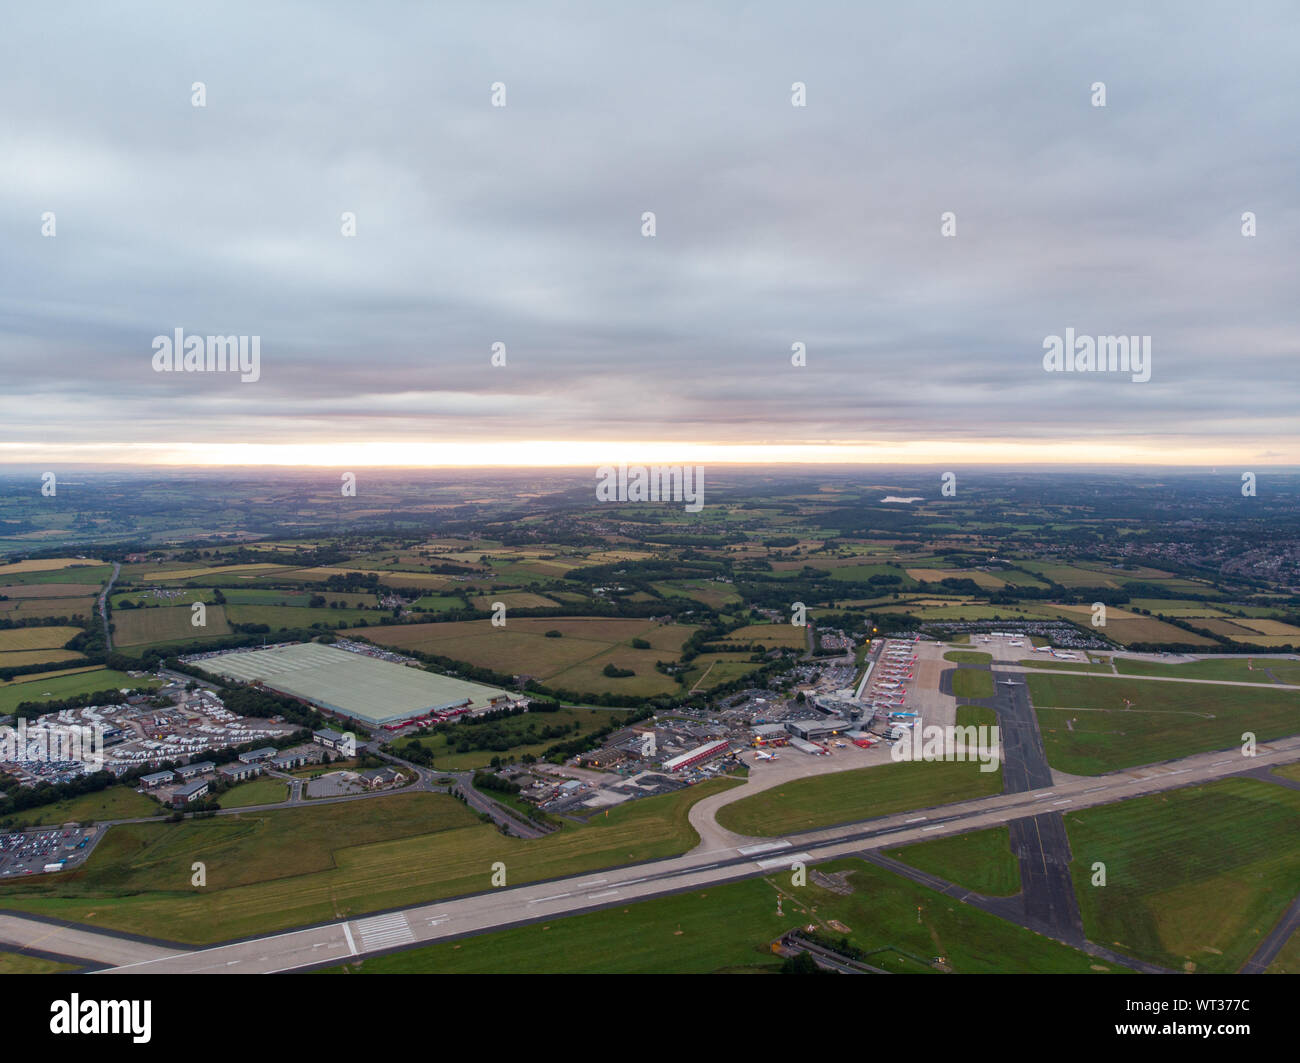 Aerial photo of the famous Leeds and Bradford airport located in the Yeadon area of West Yorkshire in the UK, typical British airport showing the runw Stock Photo